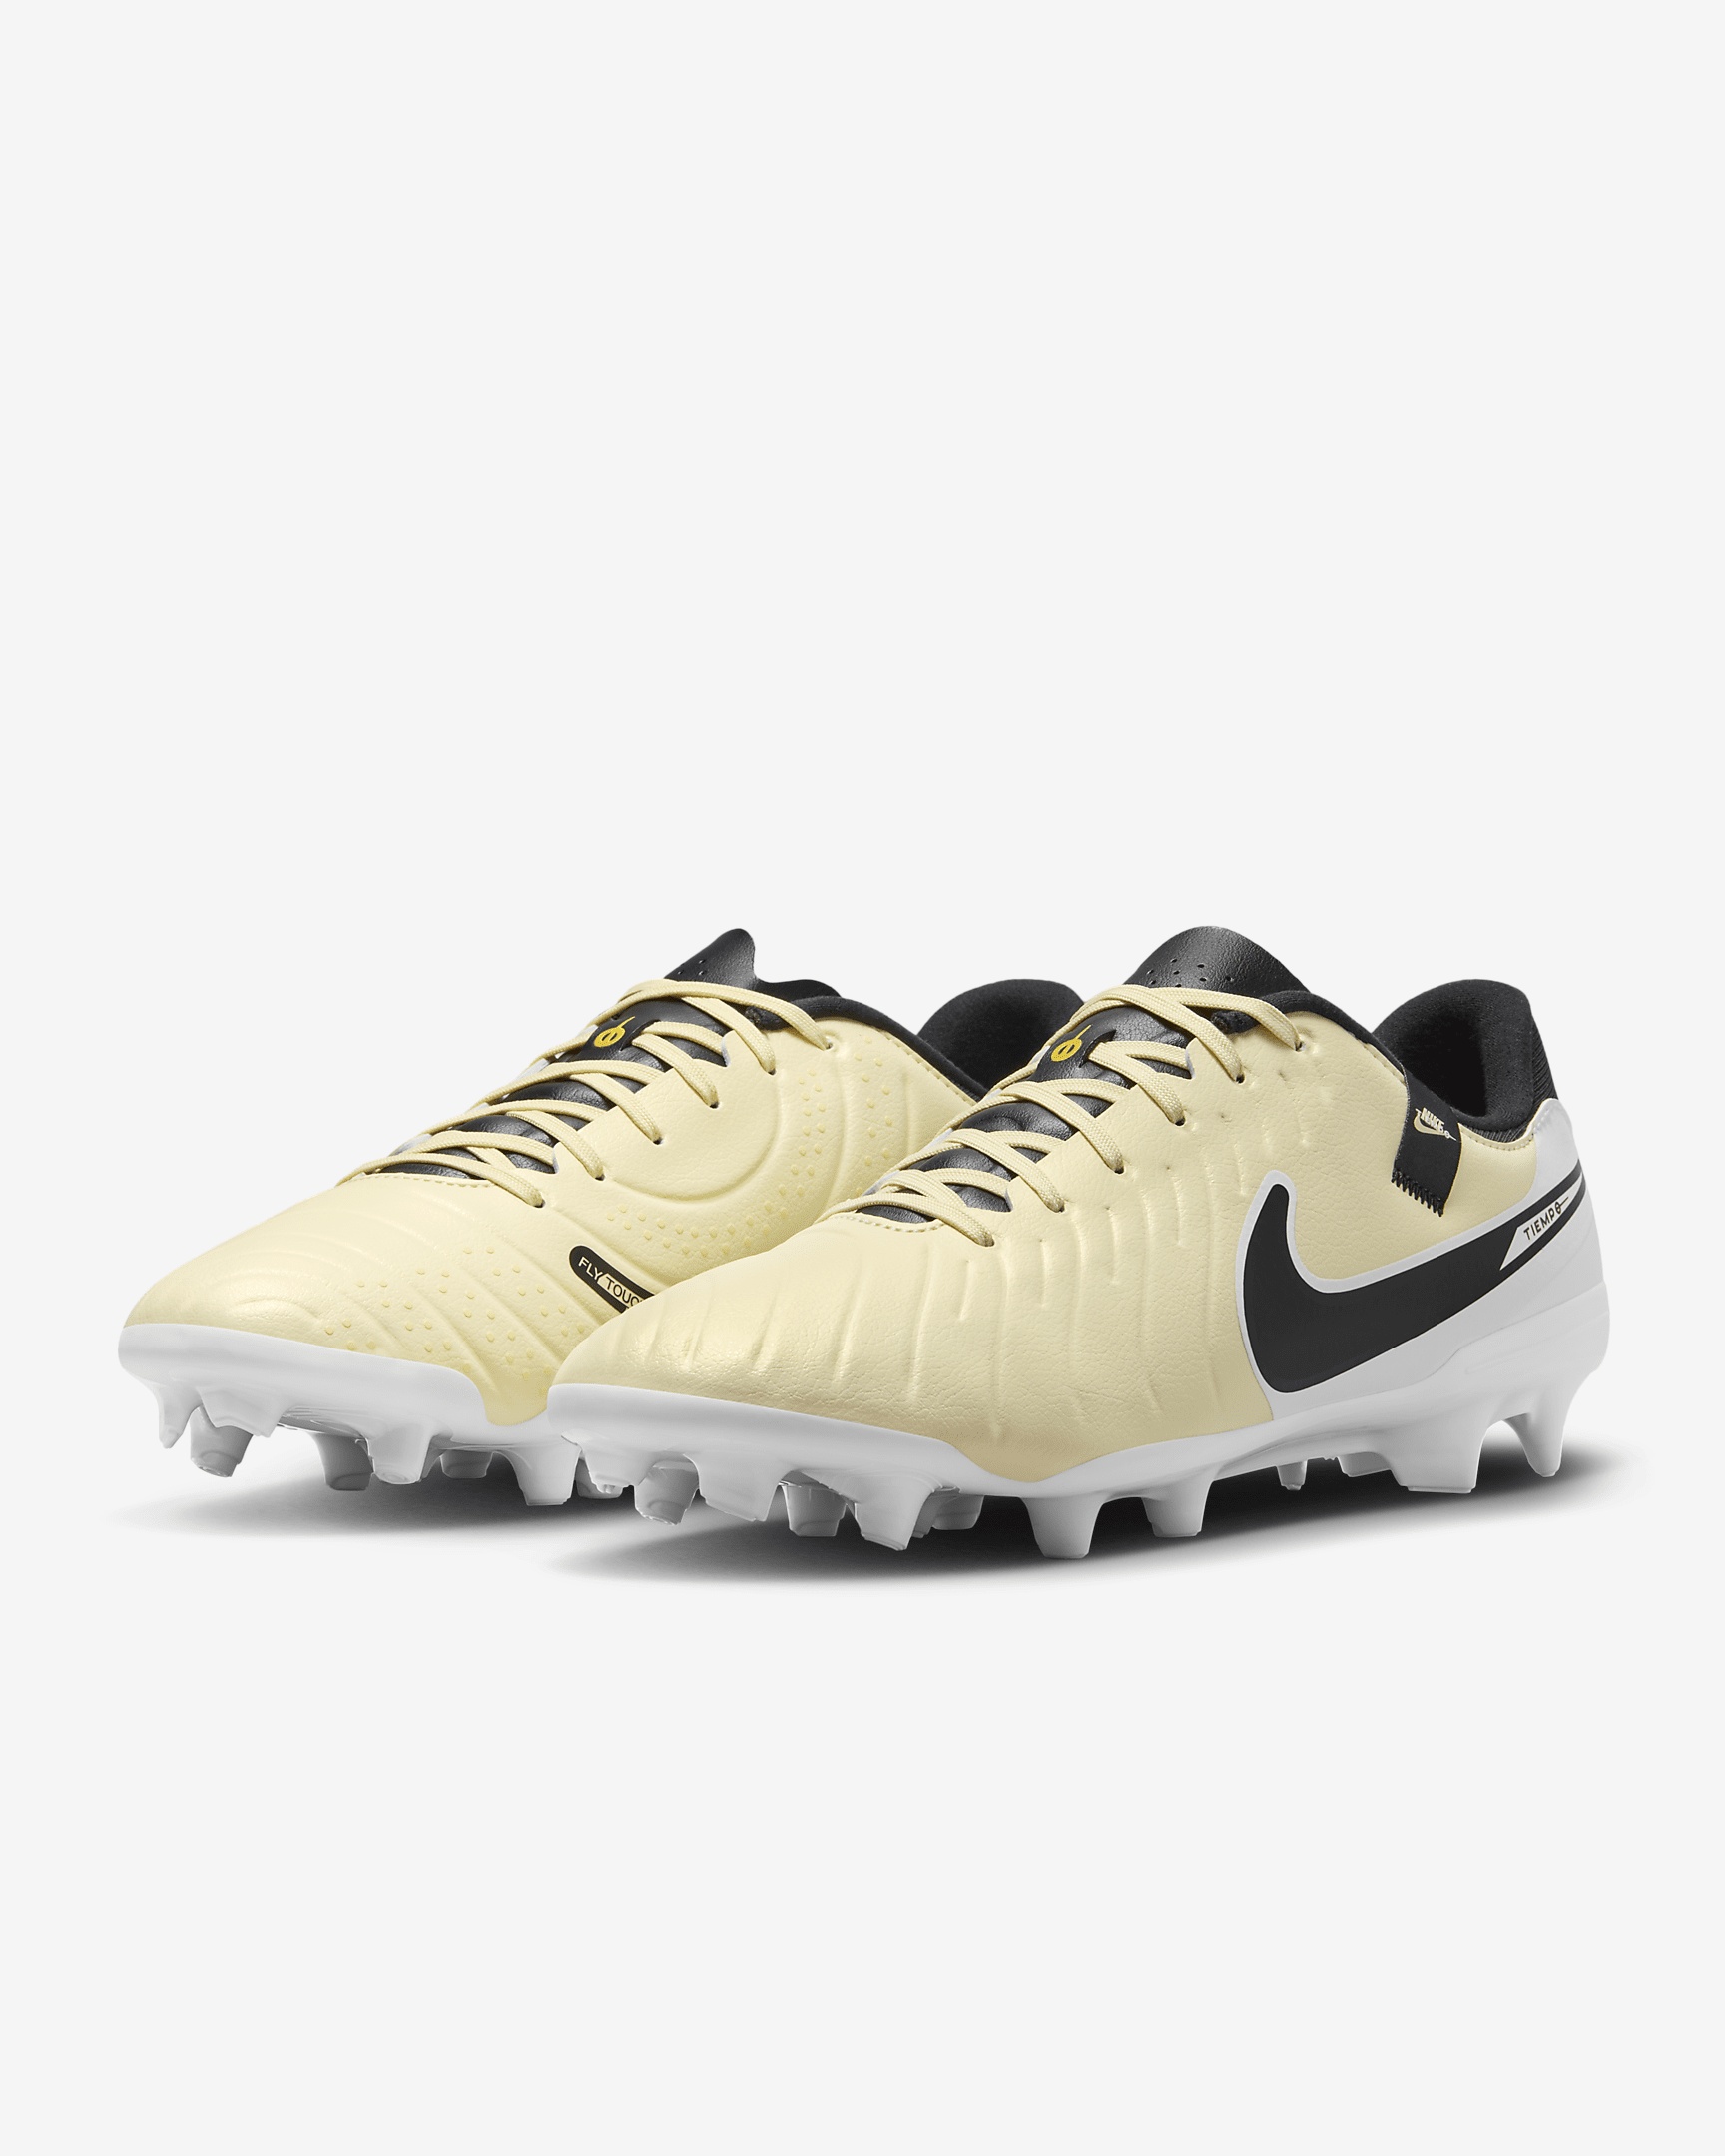 Nike Tiempo Legend 10 Academy Multi-Ground Low-Top Soccer Cleats - 5